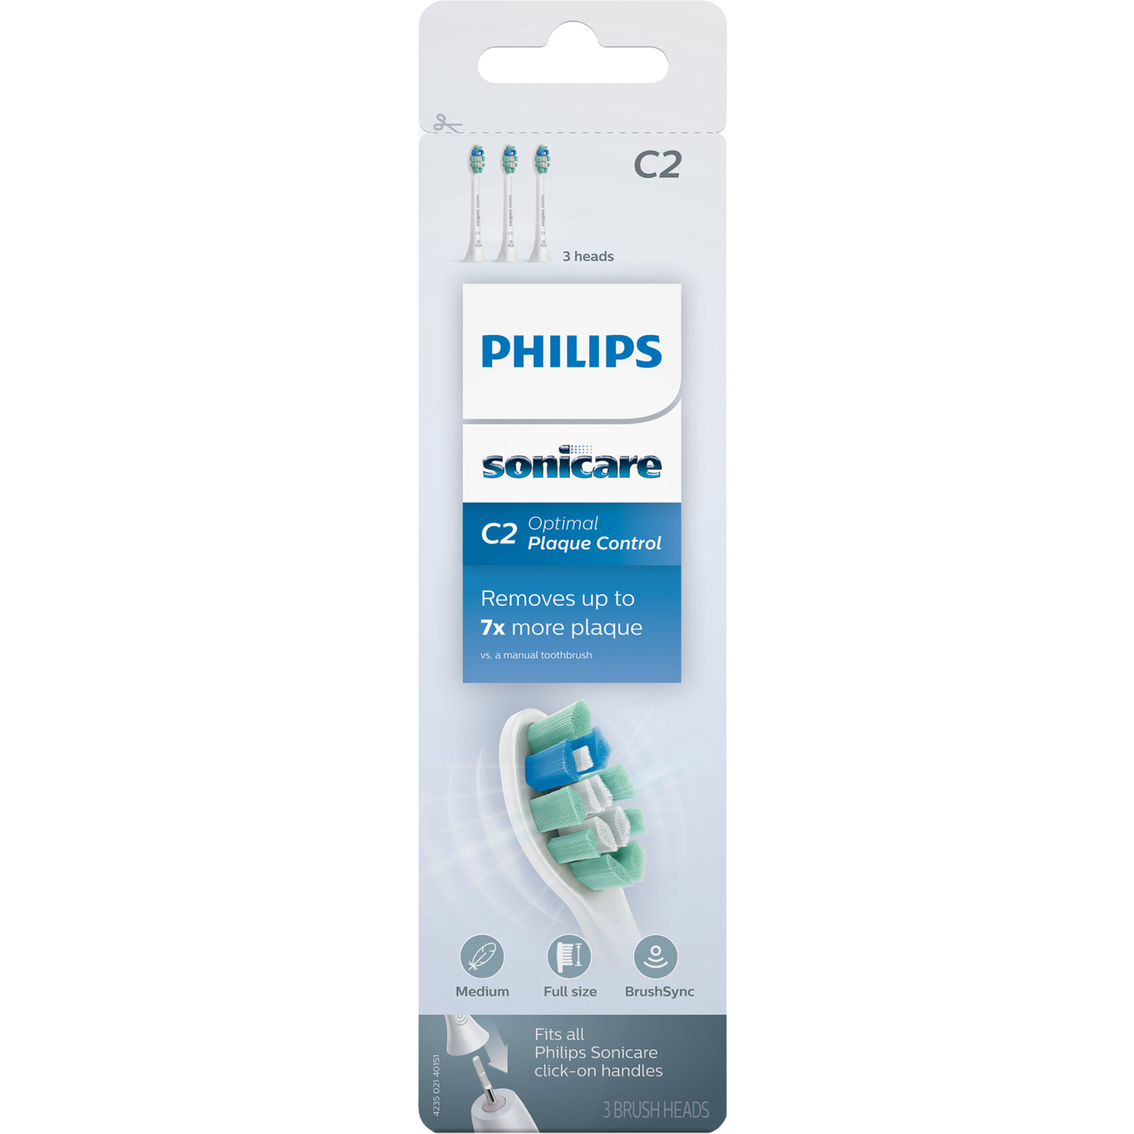 Philips Sonicare C2 Optimal Plaque Control Brush Head Replacements 3 pk. - Image 2 of 2